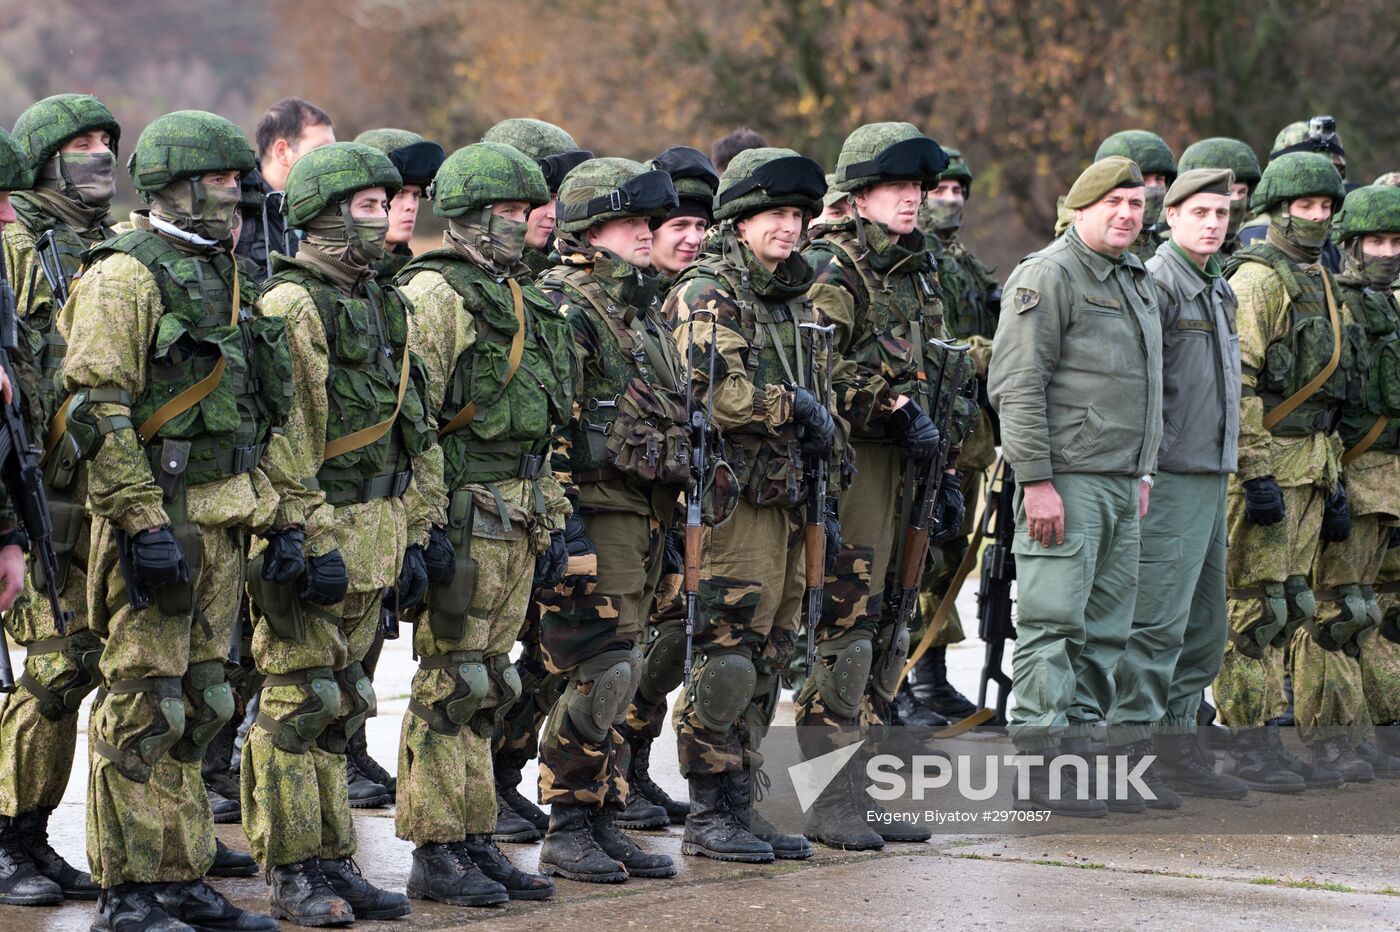 Slavic Brotherhood-2016 joint military exercise of Russia, Belarus and Serbia